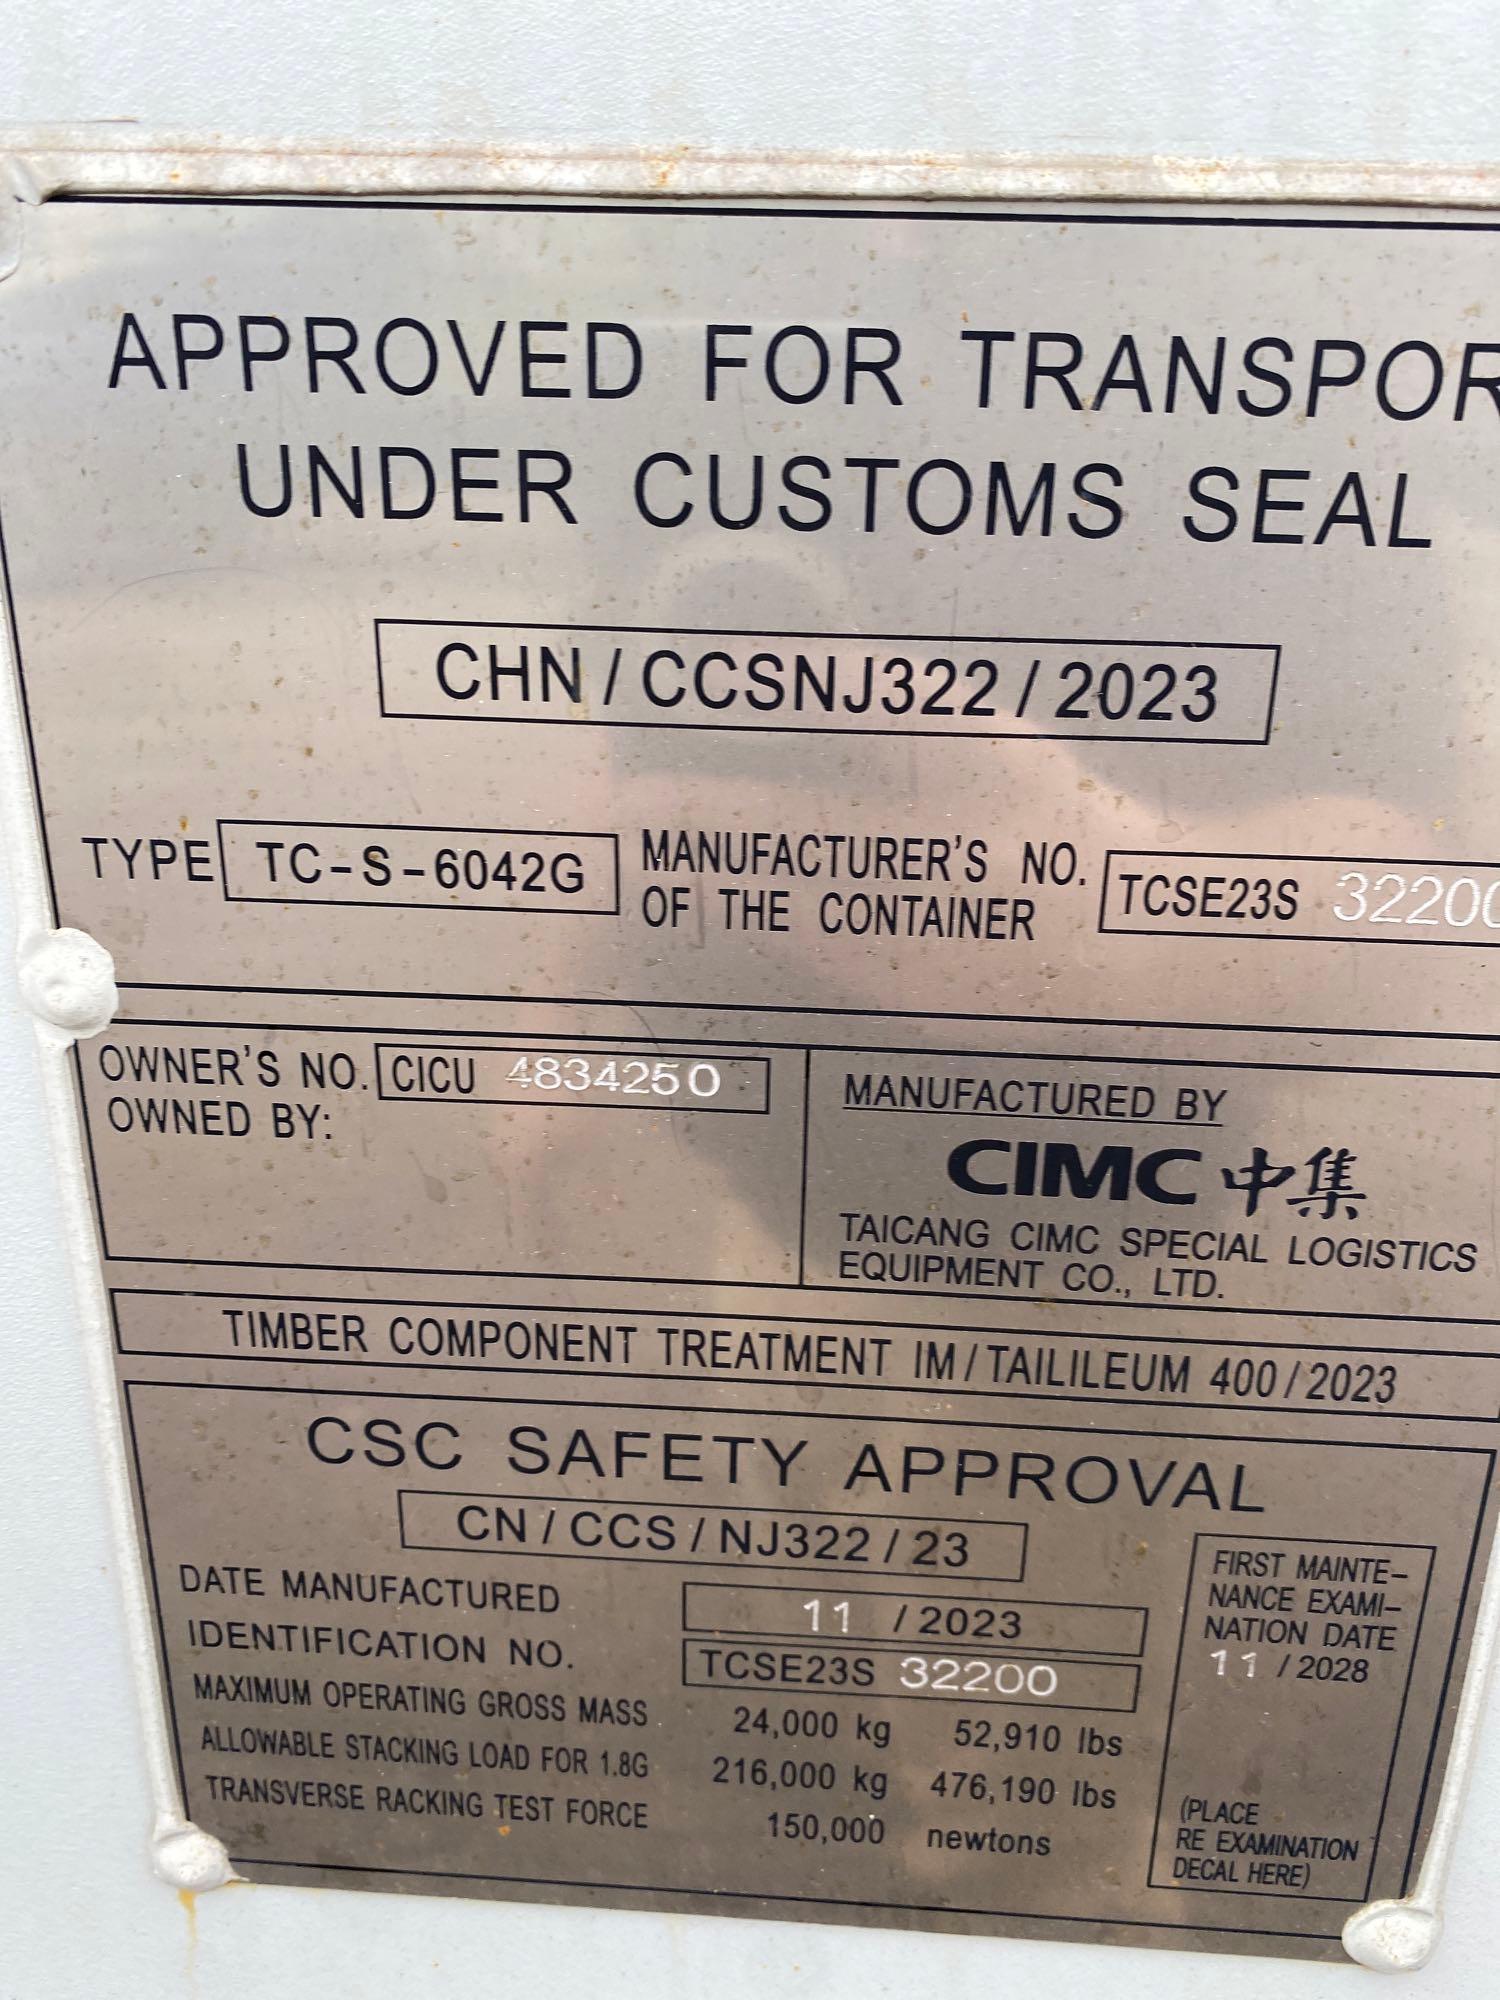 New CIMC 40ft (4 side door) Steel Shipping/Storage Container